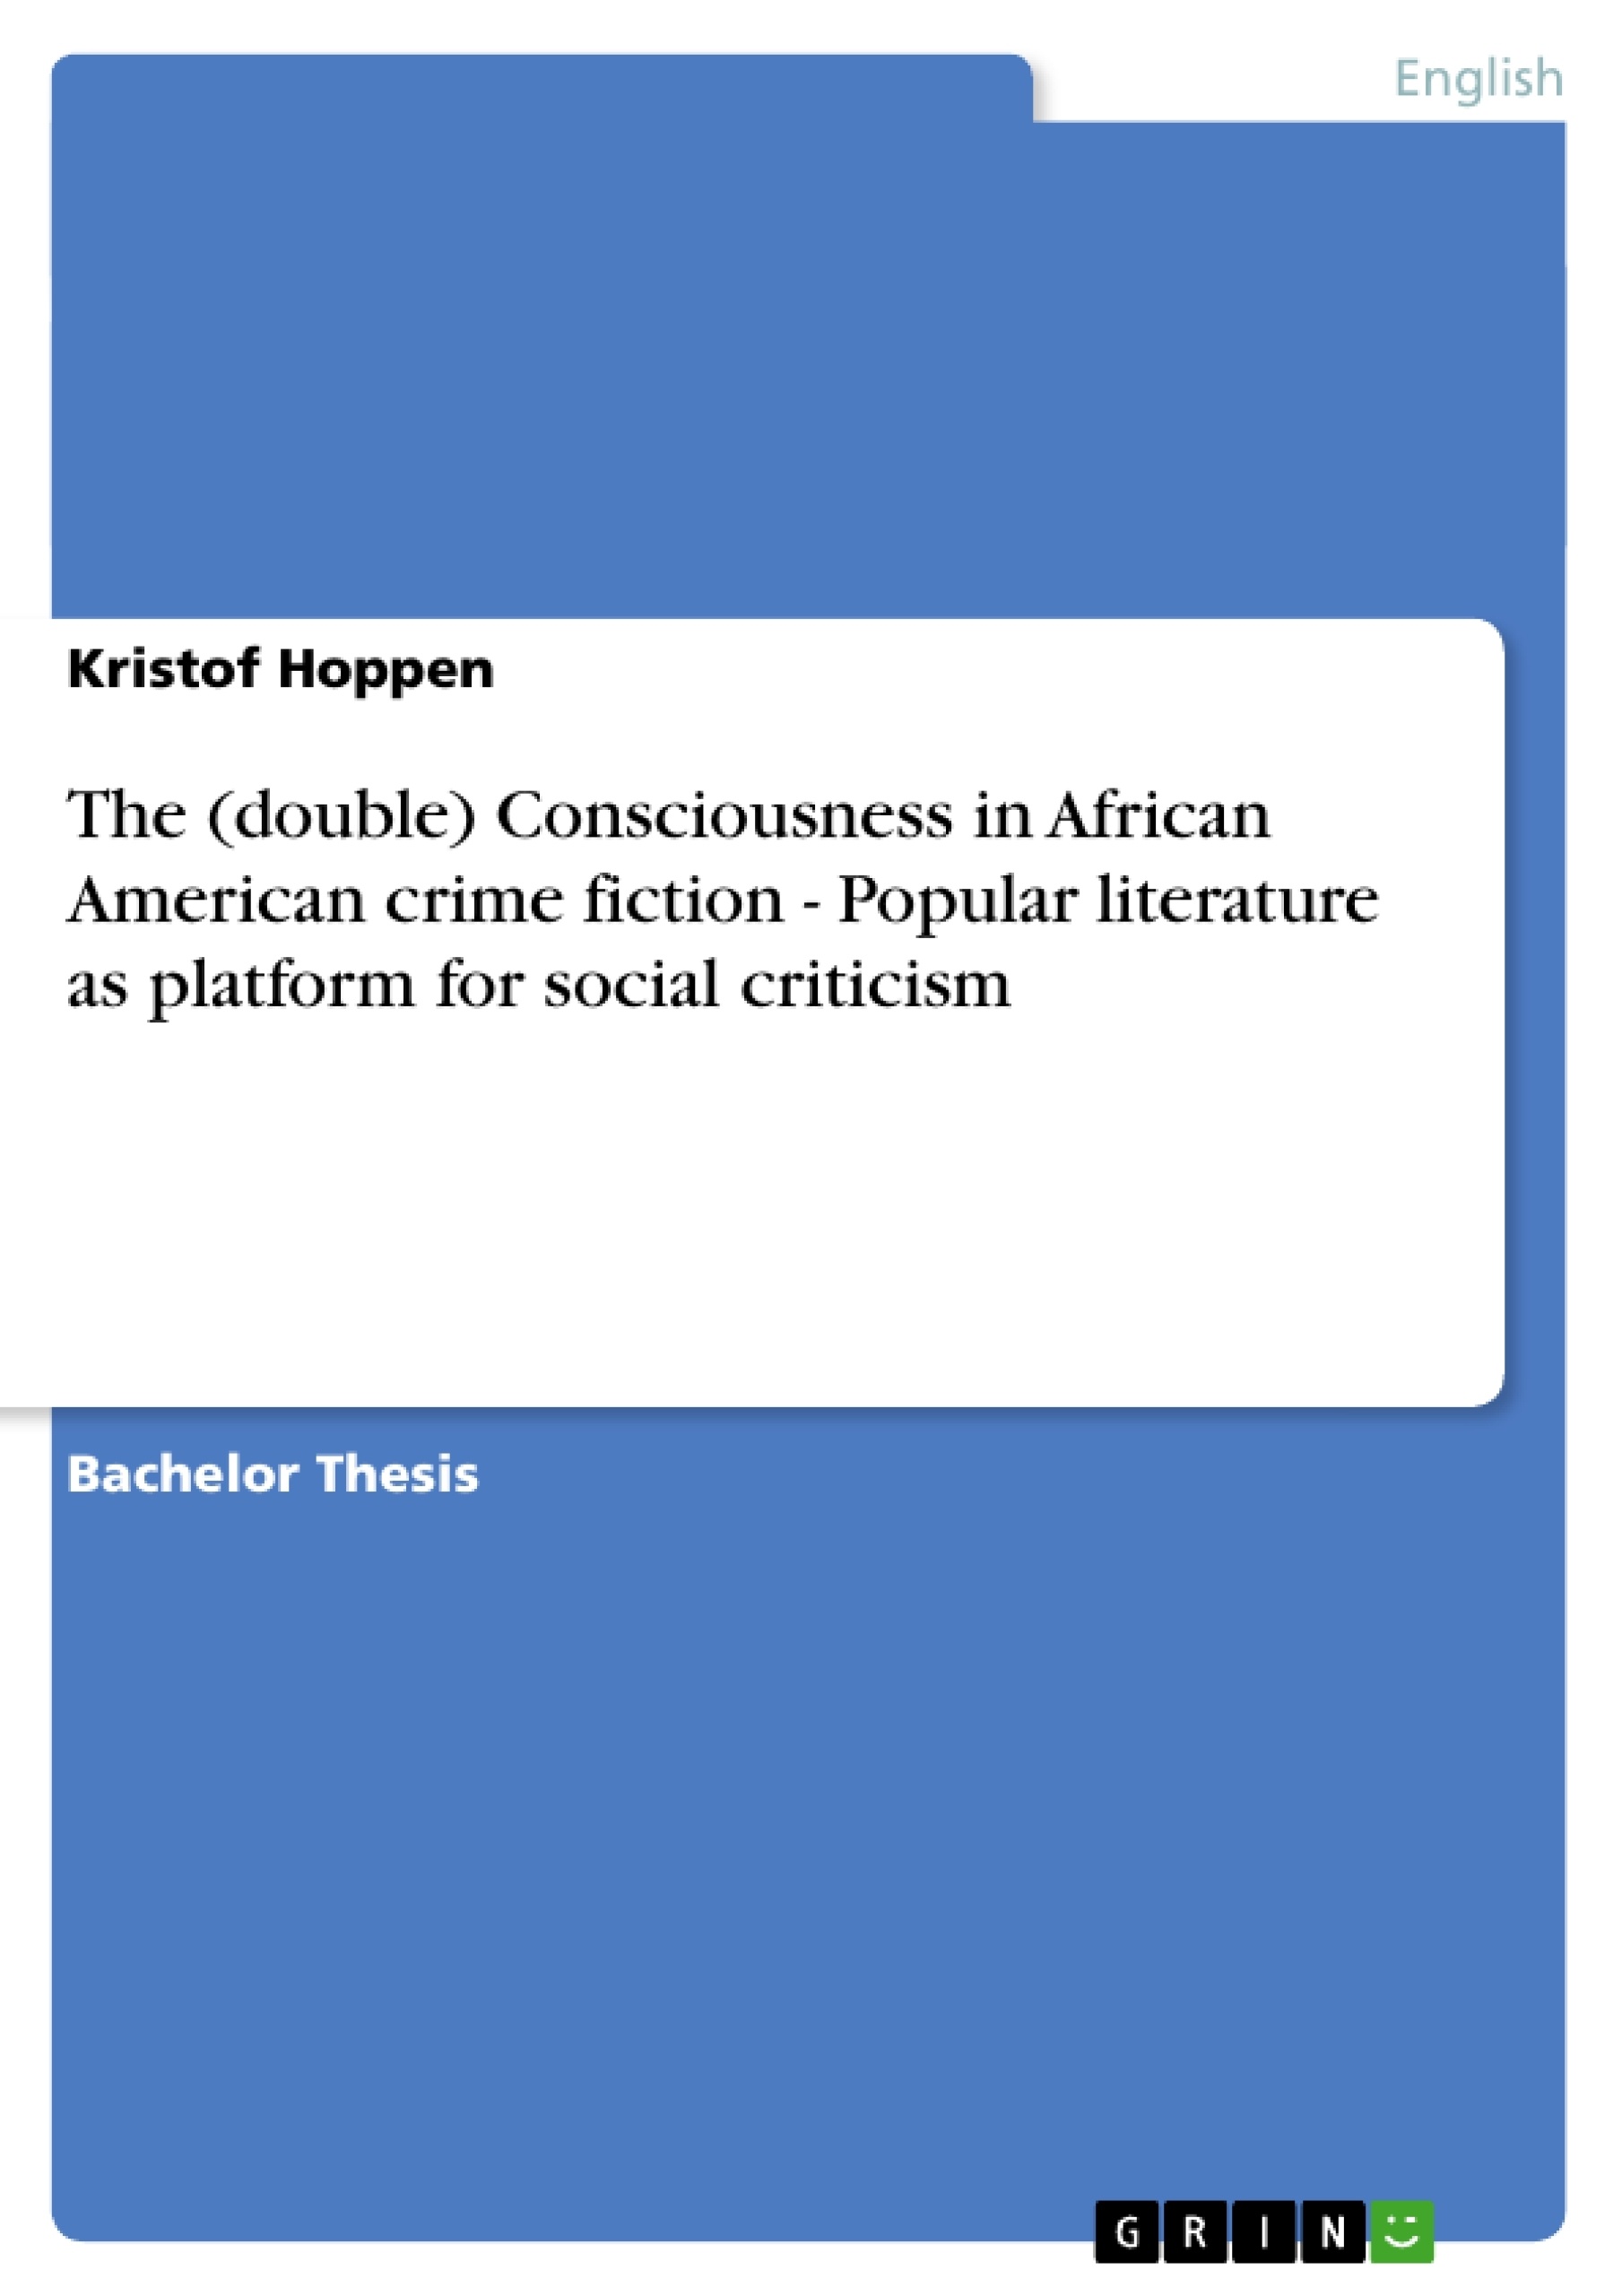 Title: The (double) Consciousness in African American crime fiction - Popular literature as platform for social criticism